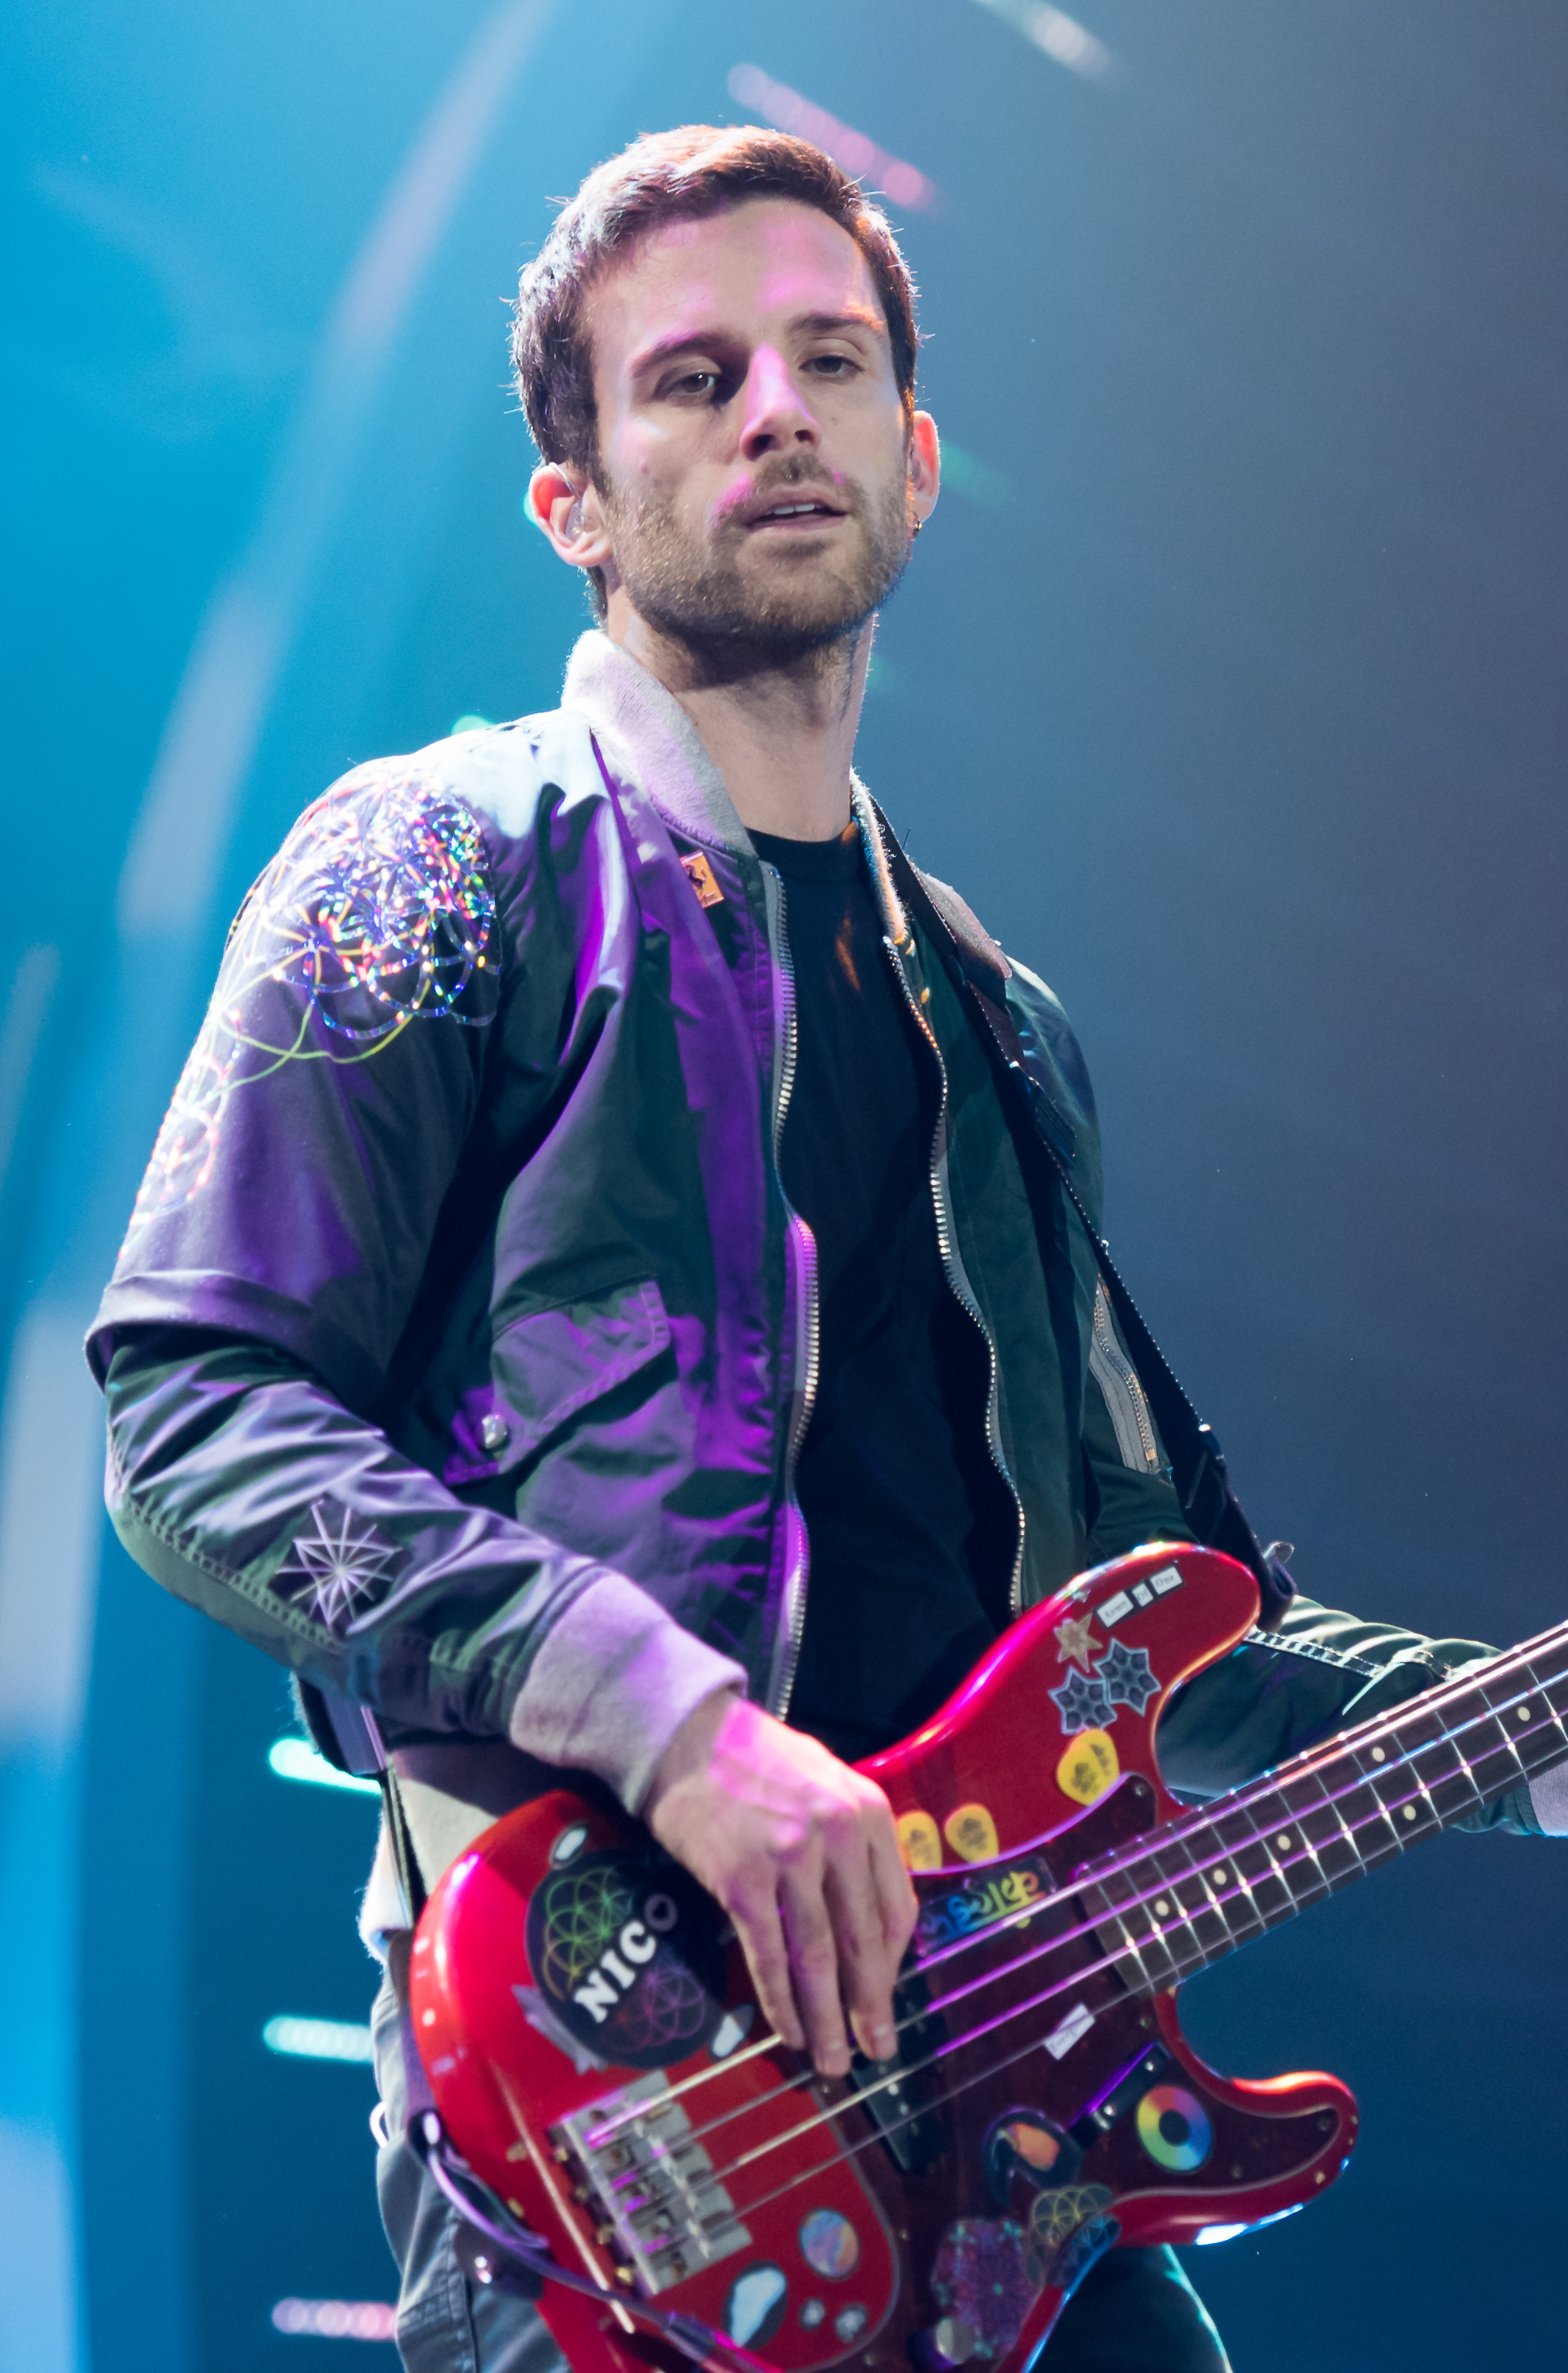 File:Coldplay - Guy Berryman (cropped).jpg - Simple English Wikipedia